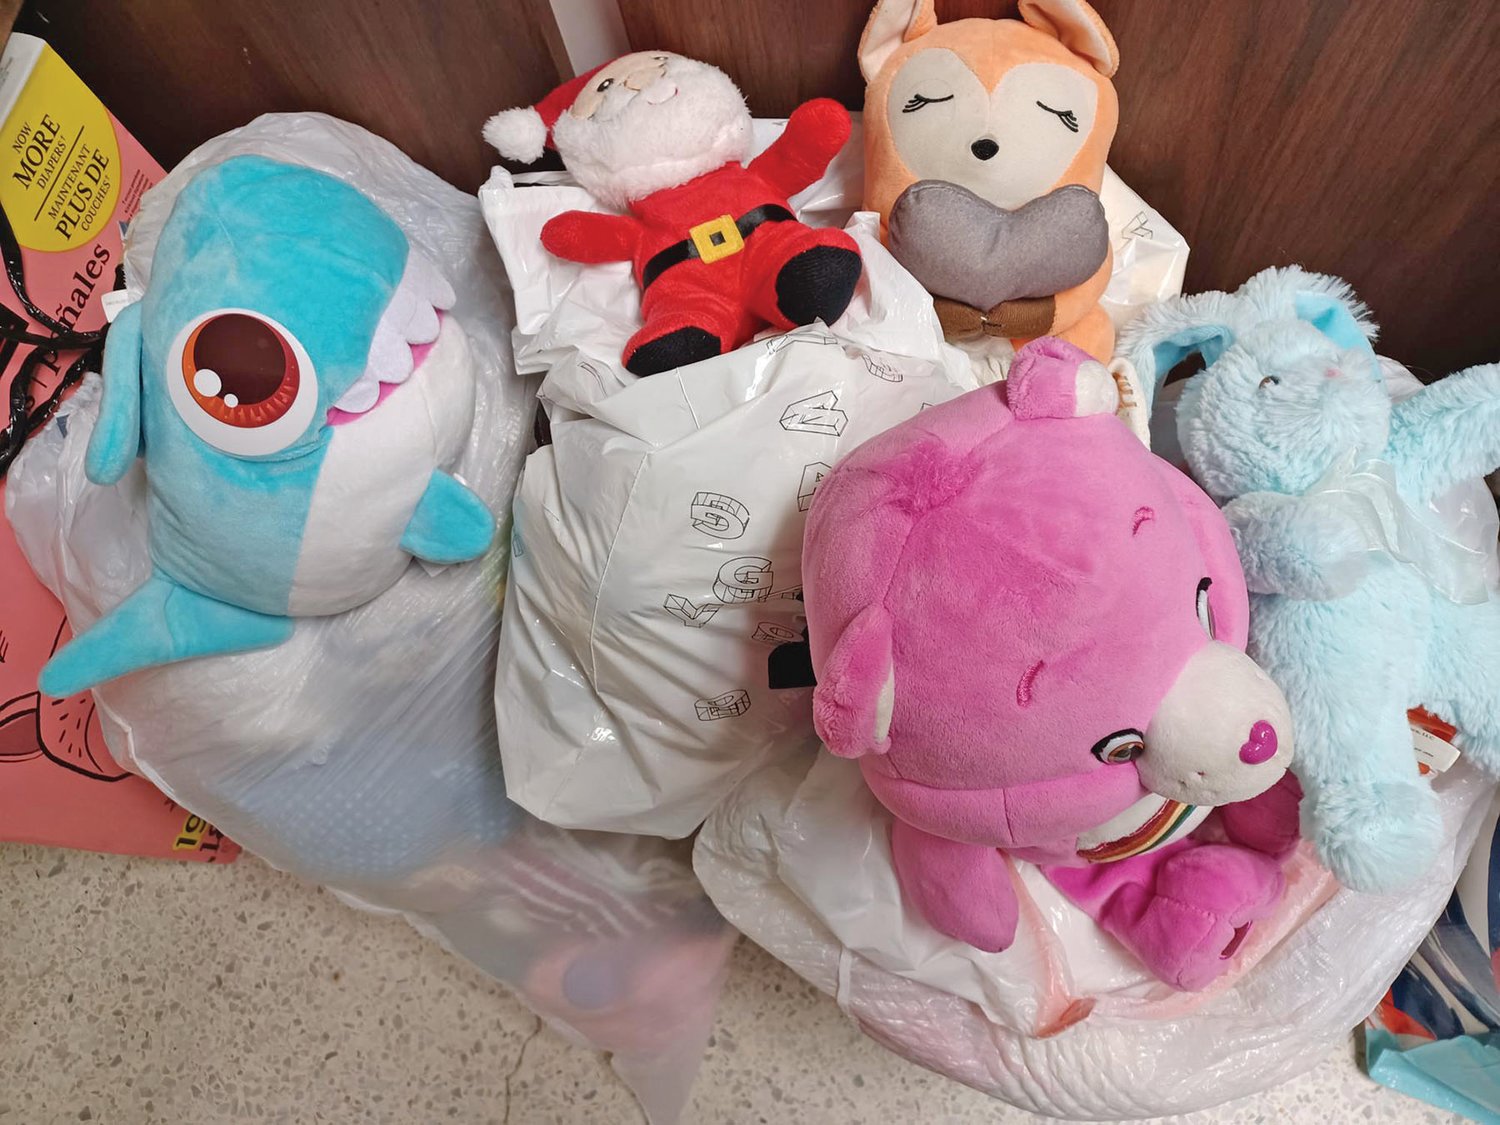 More stuffed animals collected by Ms. Robinson’s class.